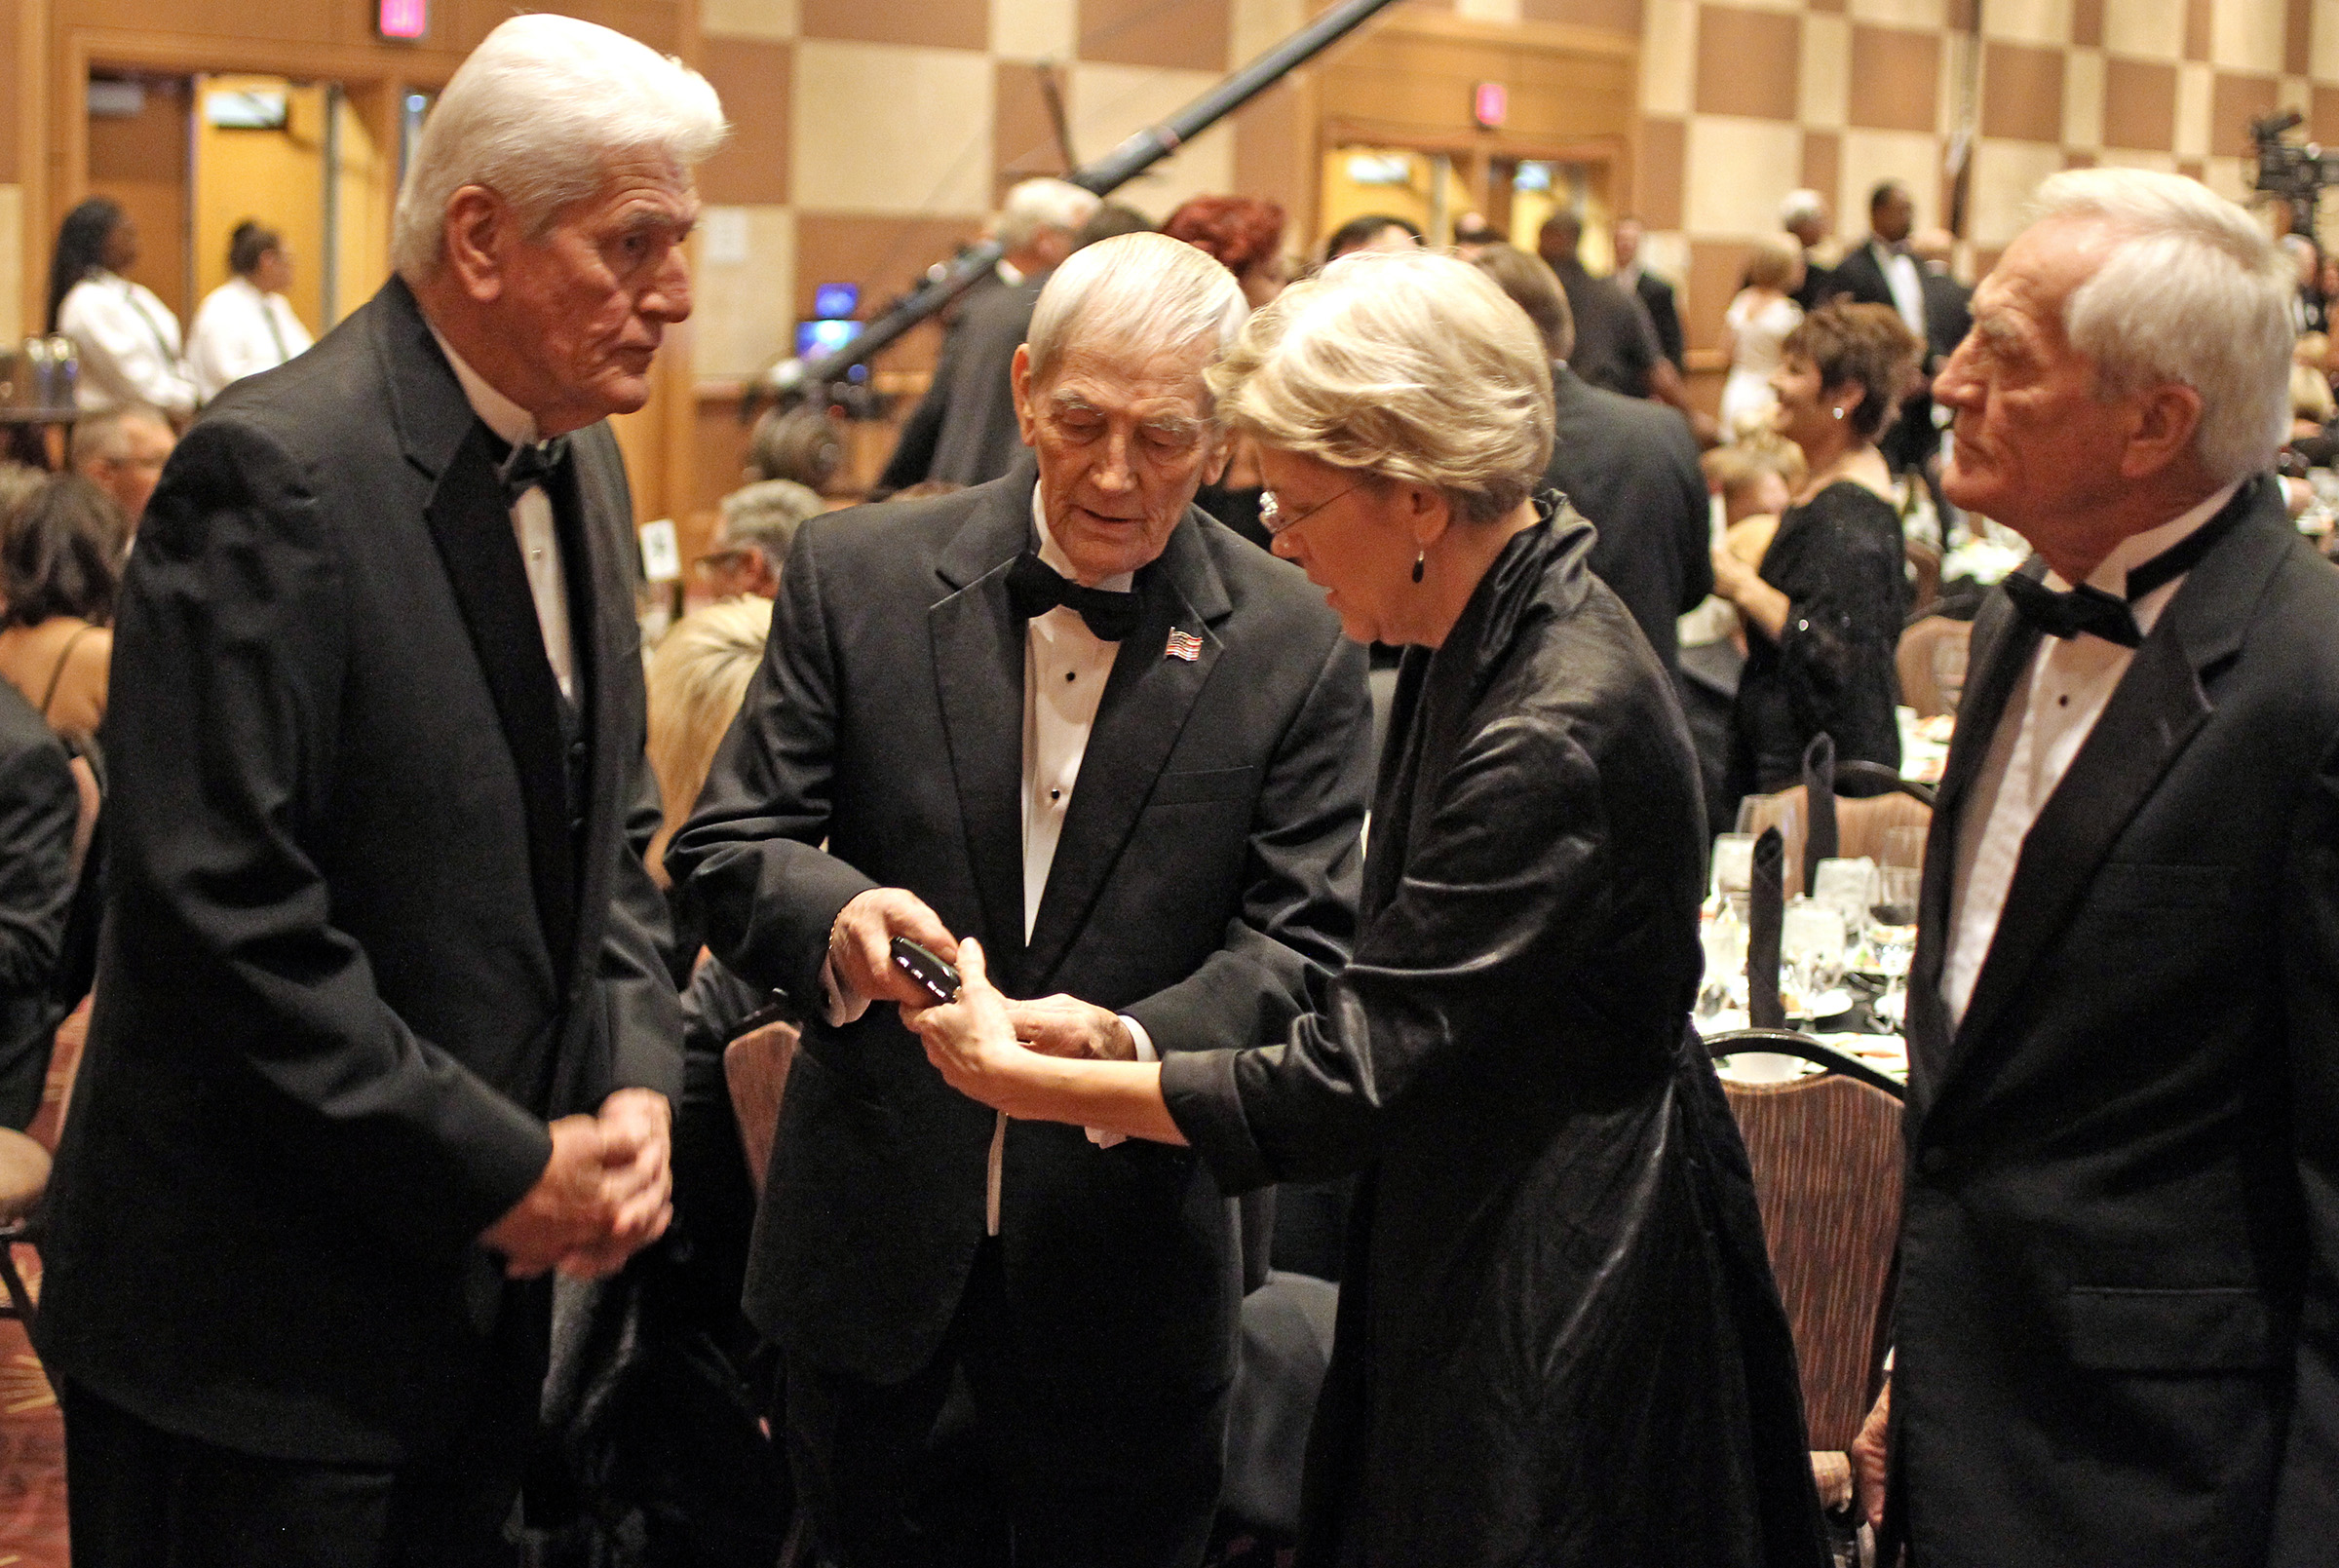 Elizabeth Warren with her three brothers in Oklahoma City in November 2011. Donald Reed Herring is center.